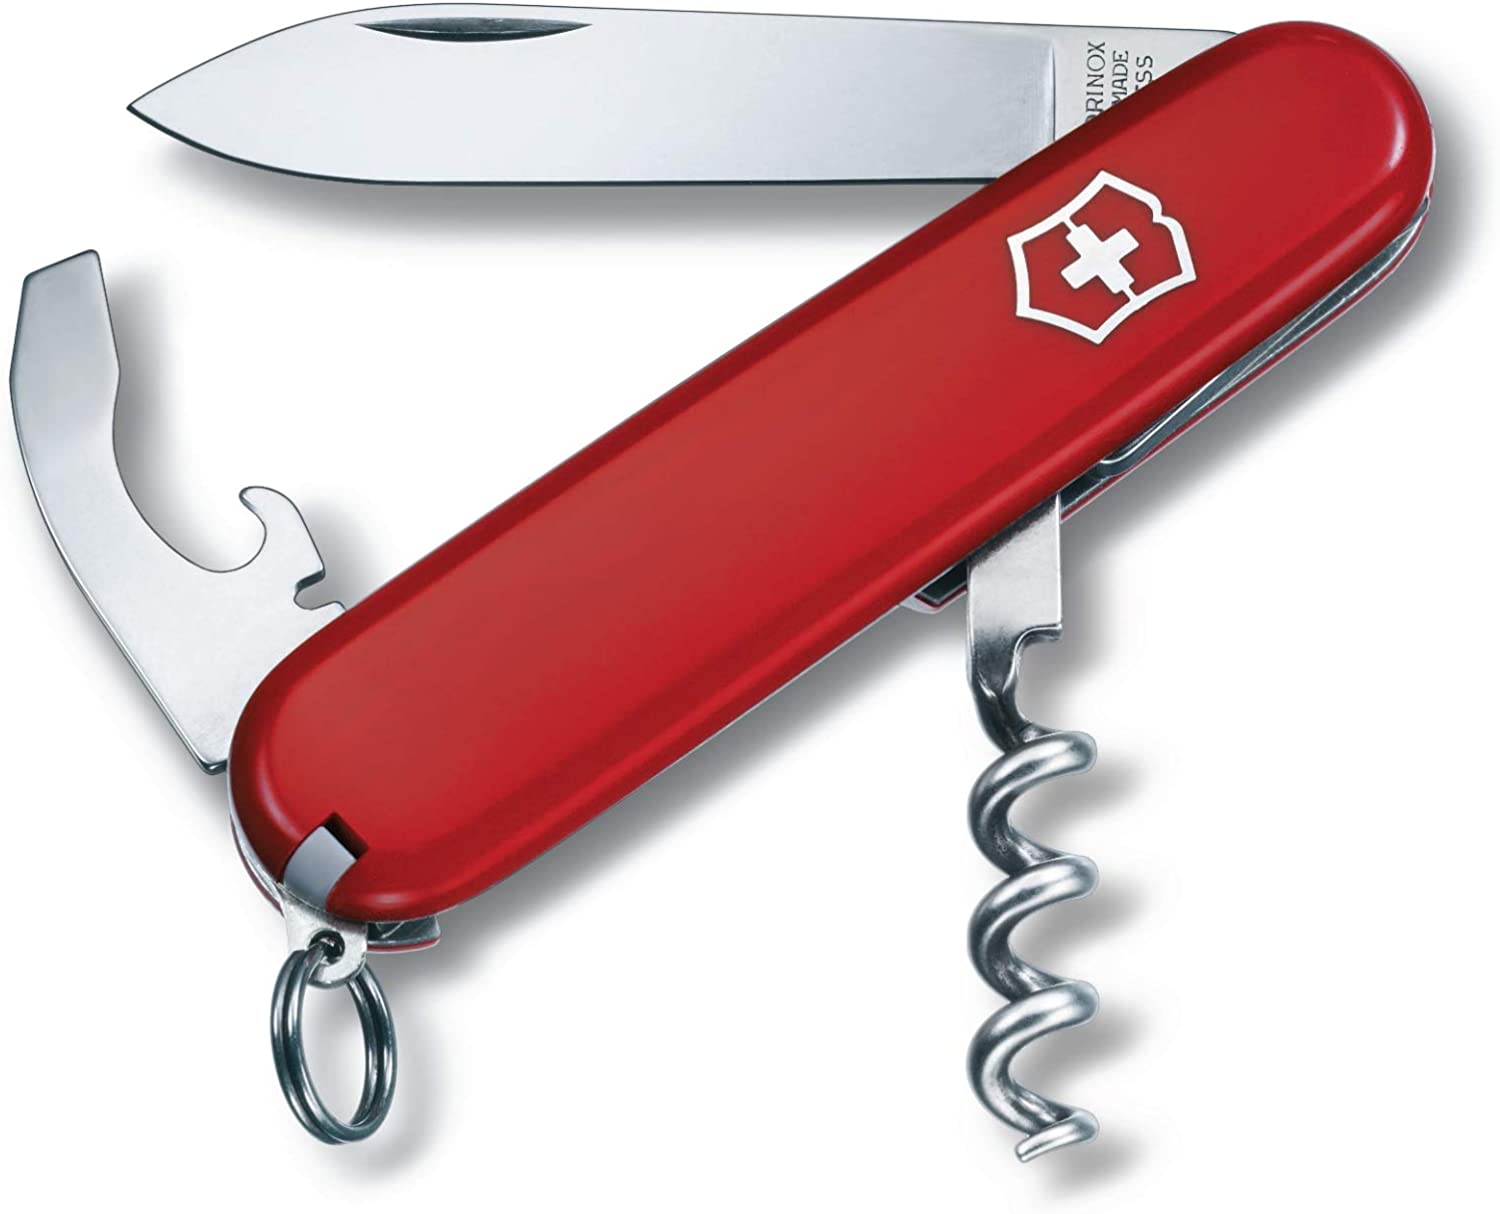  HONZIN Swiss Style Multi Function Pocket Knife - for Every Day  use Including Outdoor Survival Fishing, Gifts for Dad Men : Sports &  Outdoors